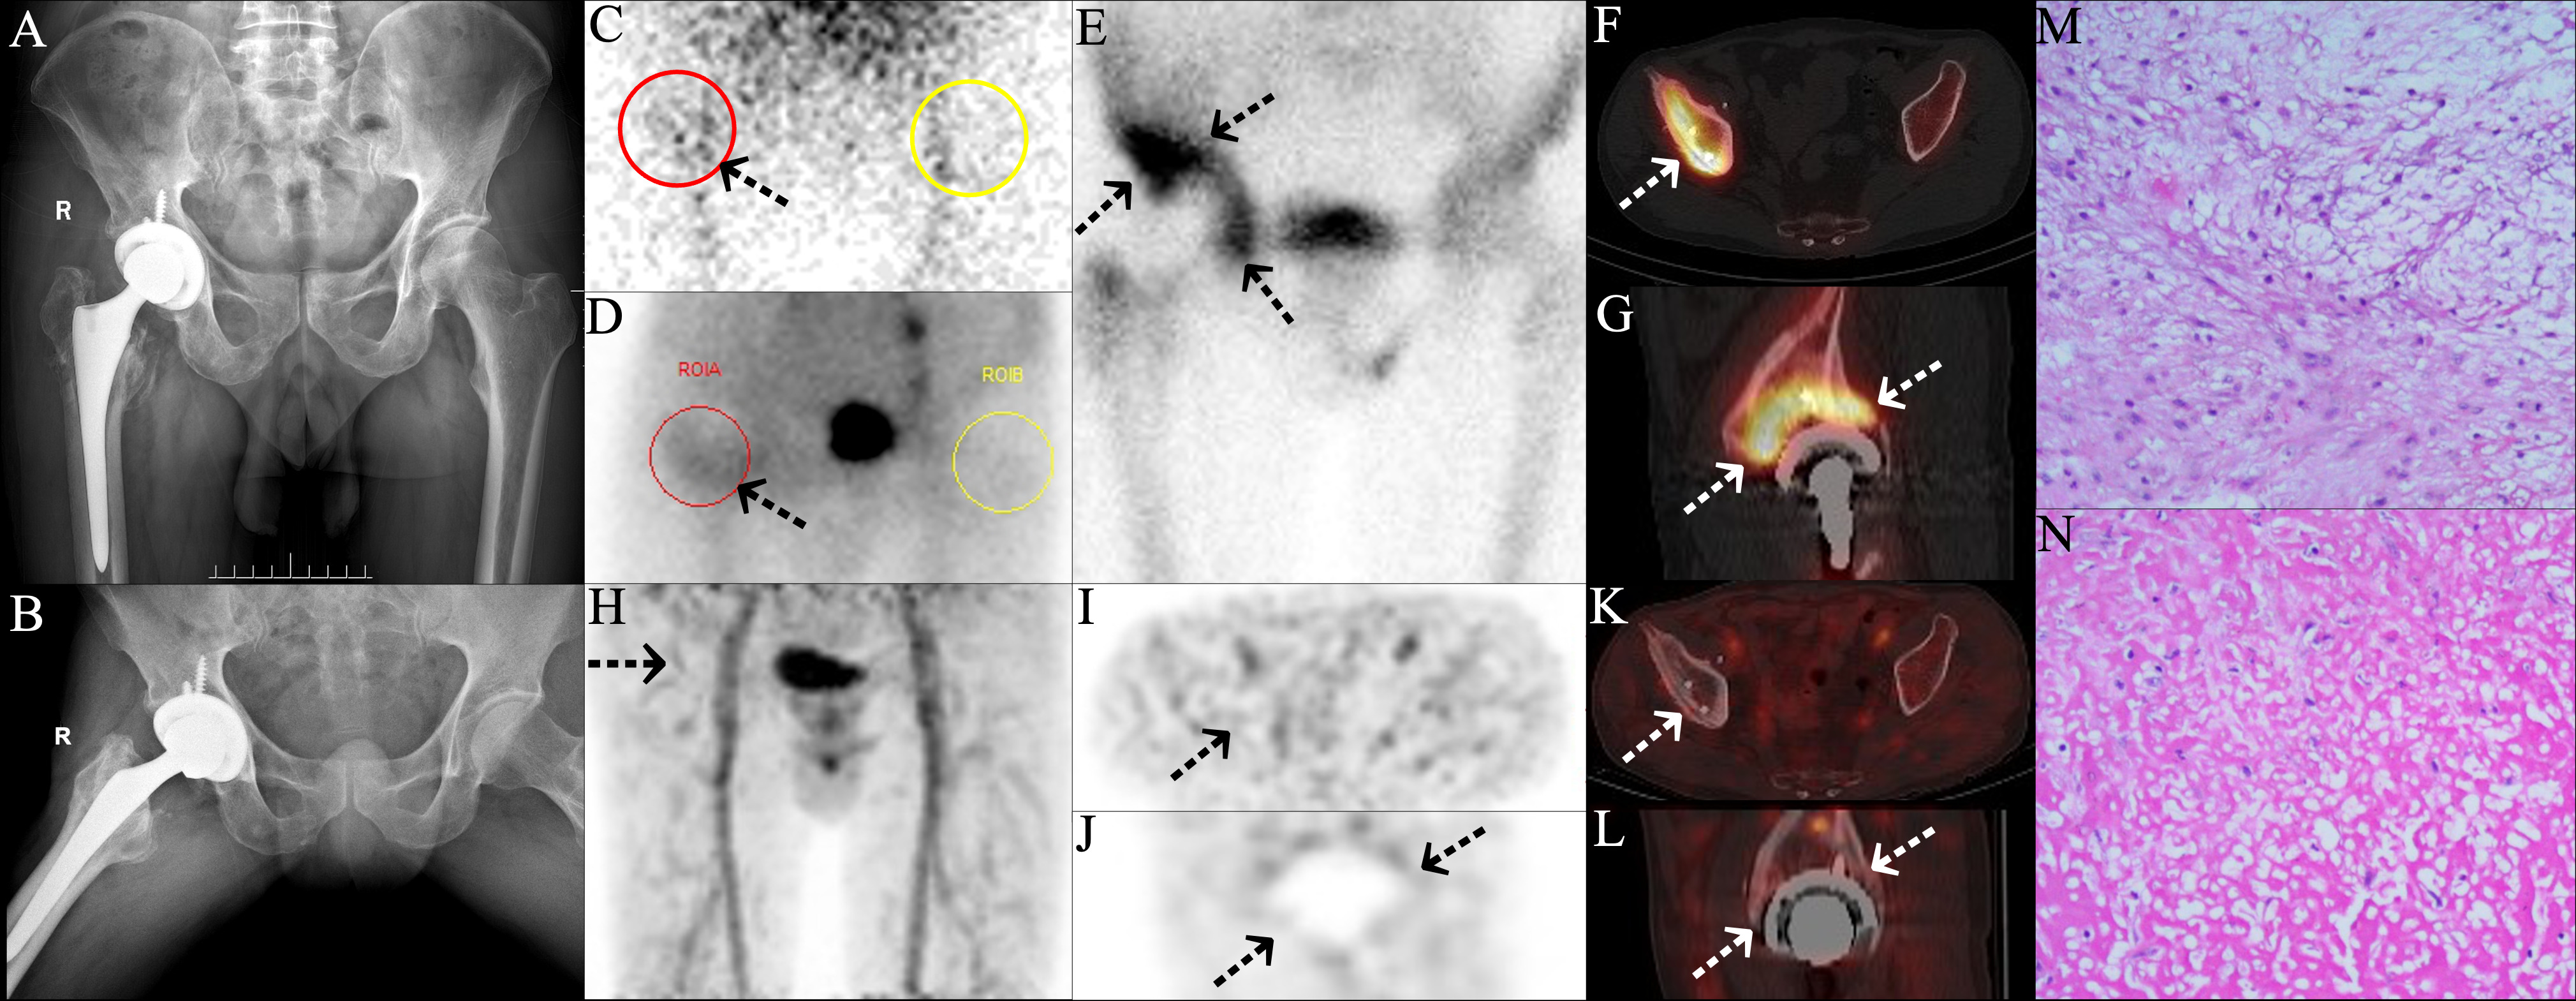 Fig. 4 
          True positive findings in the three-phase bone scan and single photon emission CT (SPECT)/CT, and false negative findings in positron emission tomography (PET)/CT, for infection in a patient with periprosthetic joint infection (PJI) confirmed by microbiological culture of Enterobacter faecalis. A 59-year-old man underwent a right hip arthroplasty for traumatic arthritis of the right hip after fracture of the right femur in 2012. Further, he underwent revision surgery for aseptic loosening (AL) of the right hip joint in 2019. He developed pain and swelling of the right hip joint one month ago. a) and b) No obvious positive signs were found in the anteroposterior (AP) and lateral radiographs postoperative at one year of the right hip joint. c) to e) 99mTc-MDP three-phase bone scan showed positive perfusion, blood pool, and delayed phase in right hip (arrows) (red circle and region of interest of the affected side (ROIA); yellow circle and region of interest of the normal side (ROIB)). f) and g) SPECT/CT revealed diffusely increased bone metabolism at the right acetabulum-prosthesis interface (arrows). h) to l) 68Ga-citrate PET/CT showed no abnormal focal or diffuse uptake (arrows). Subsequently, the patient underwent surgical treatment. m) and n) Histopathological examination of synovial tissue showed chronic inflammatory changes (haematoxylin and eosin (H&E) 400×). However, Enterobacter faecalis was found in two of the five samples. PJI of the right hip was diagnosed.
        